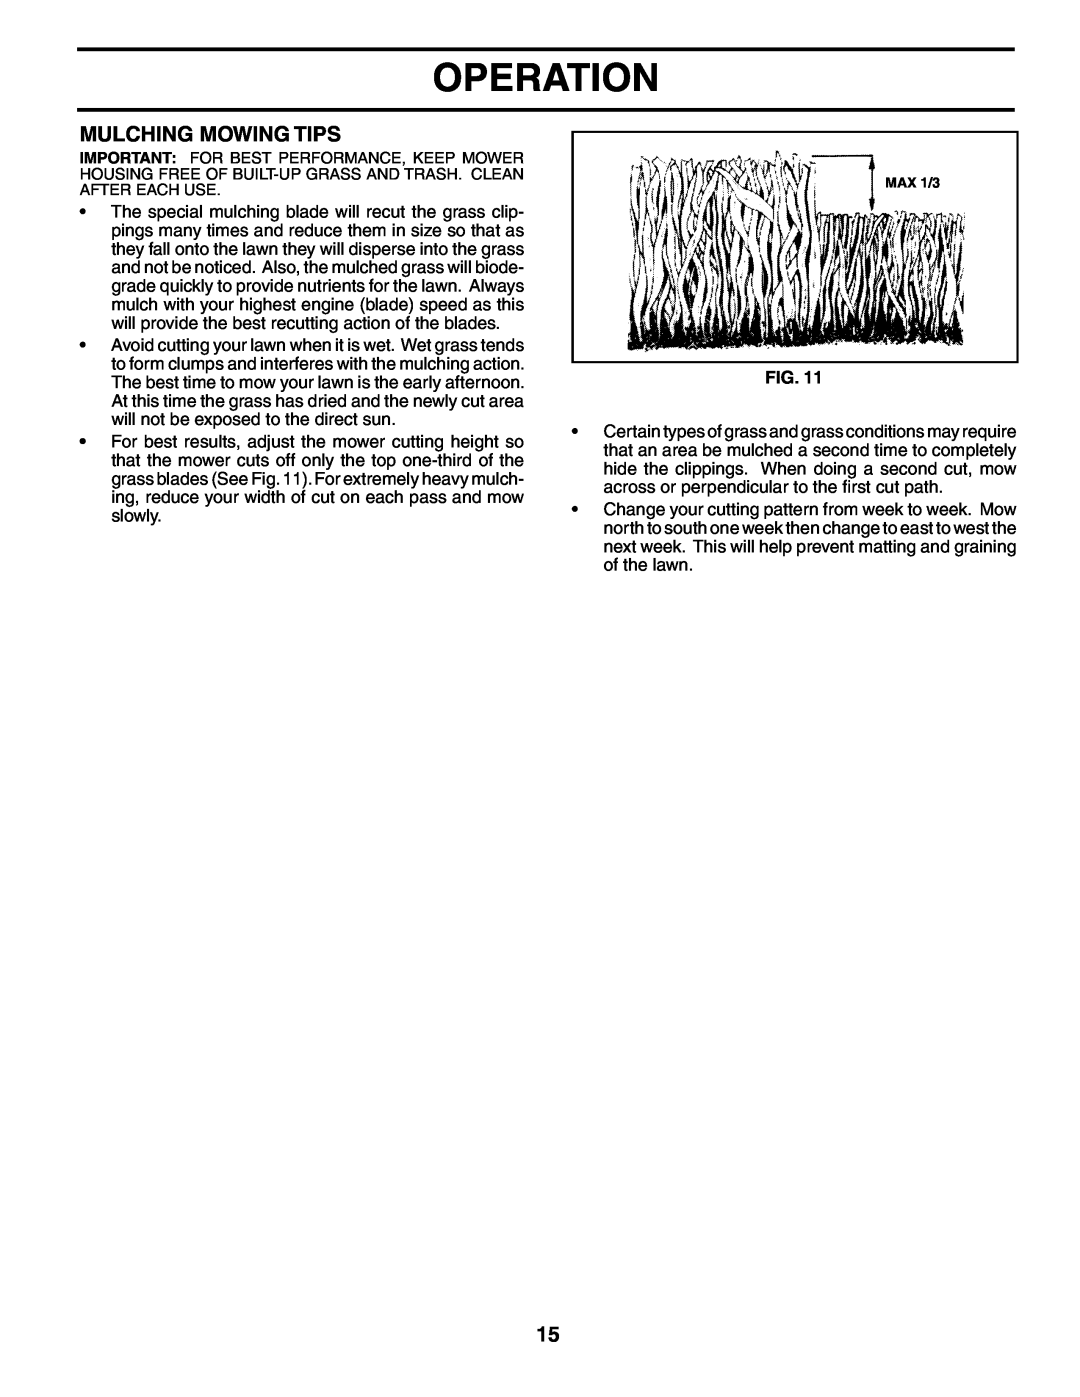 Poulan PD18H42STB owner manual Mulching Mowing Tips, Operation, MAX 1/3 